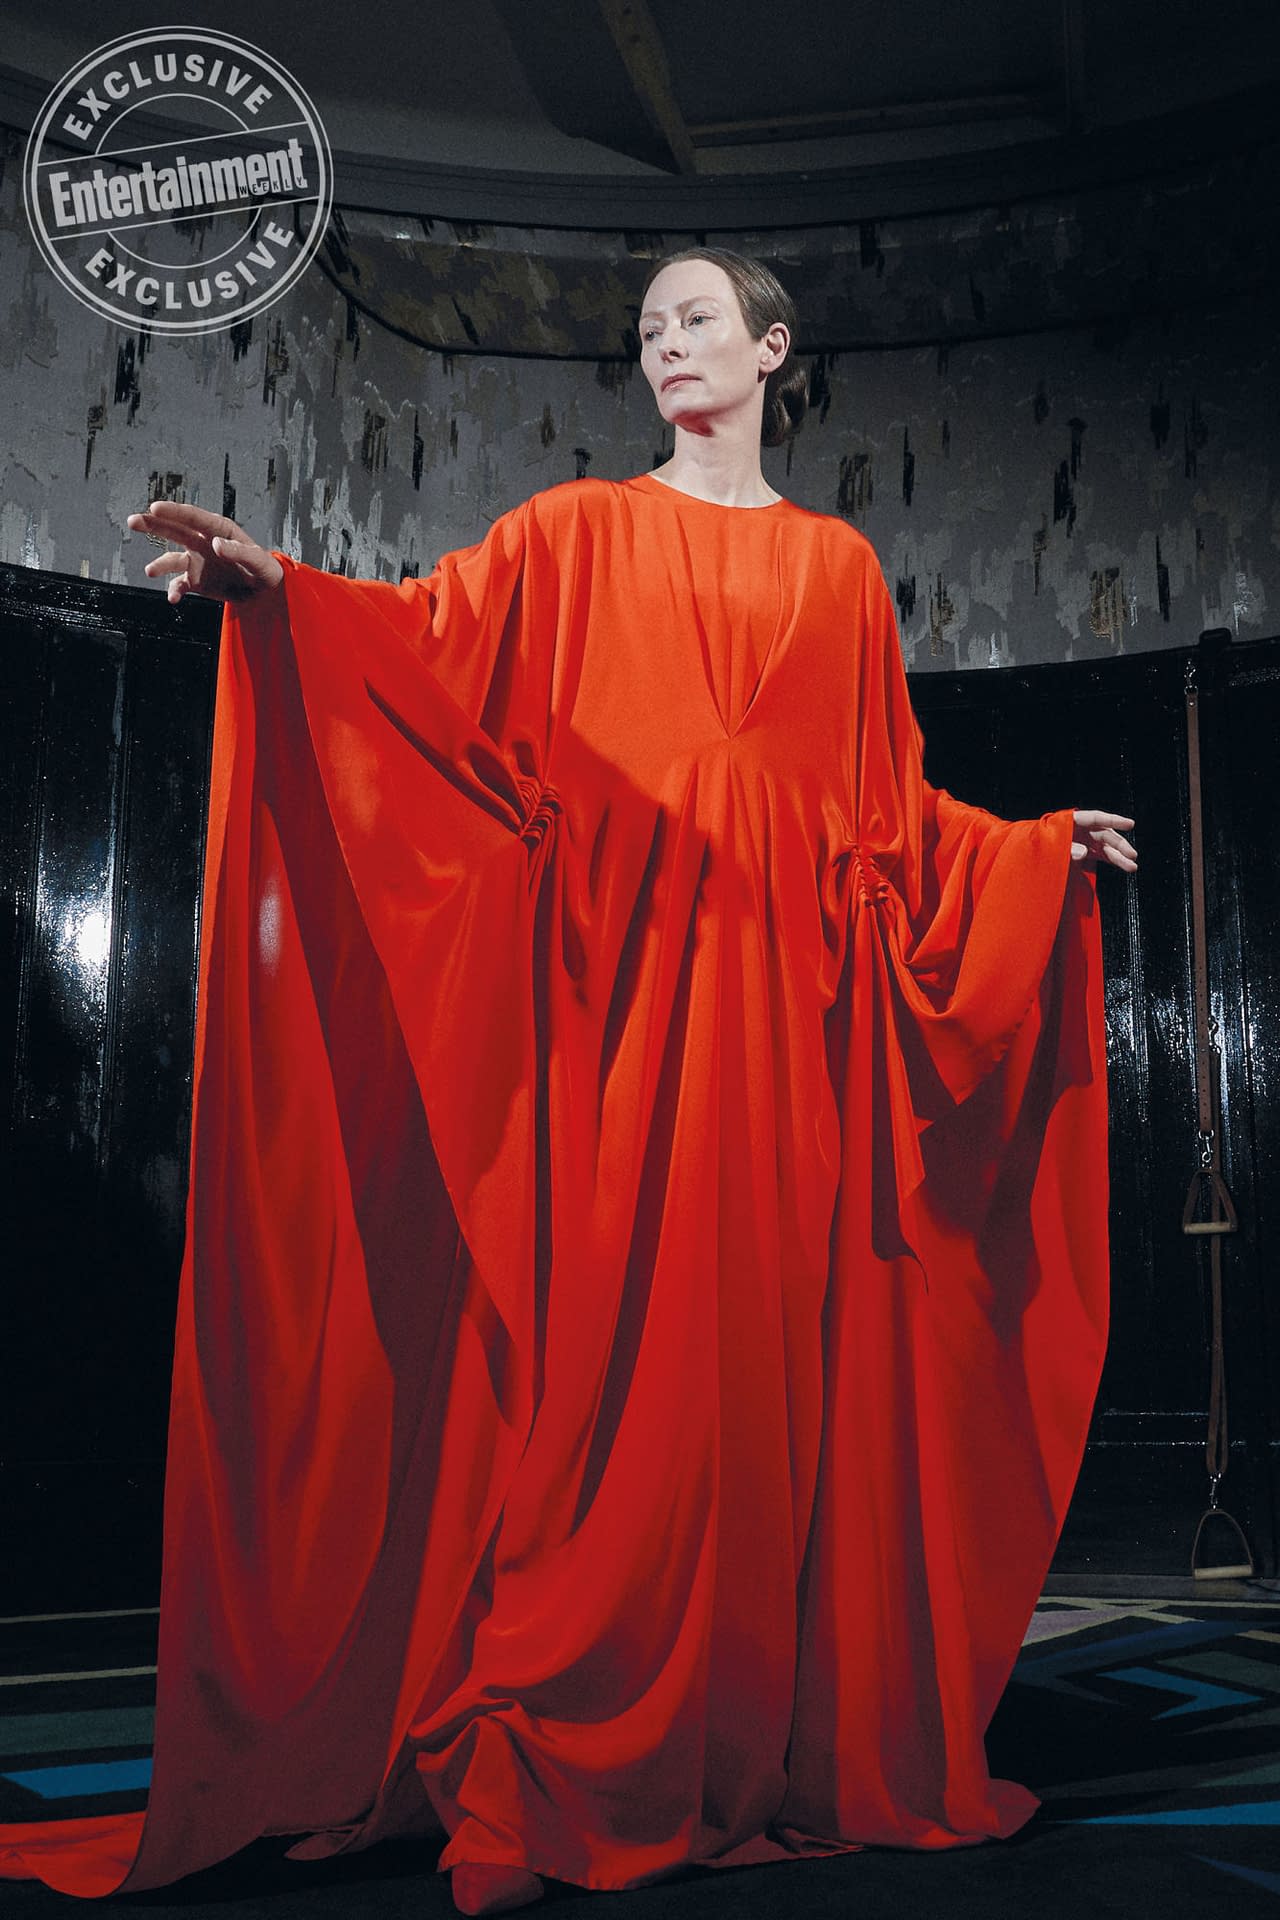 Tilda Swinton is the Head Witch in Charge in a New Suspiria Image